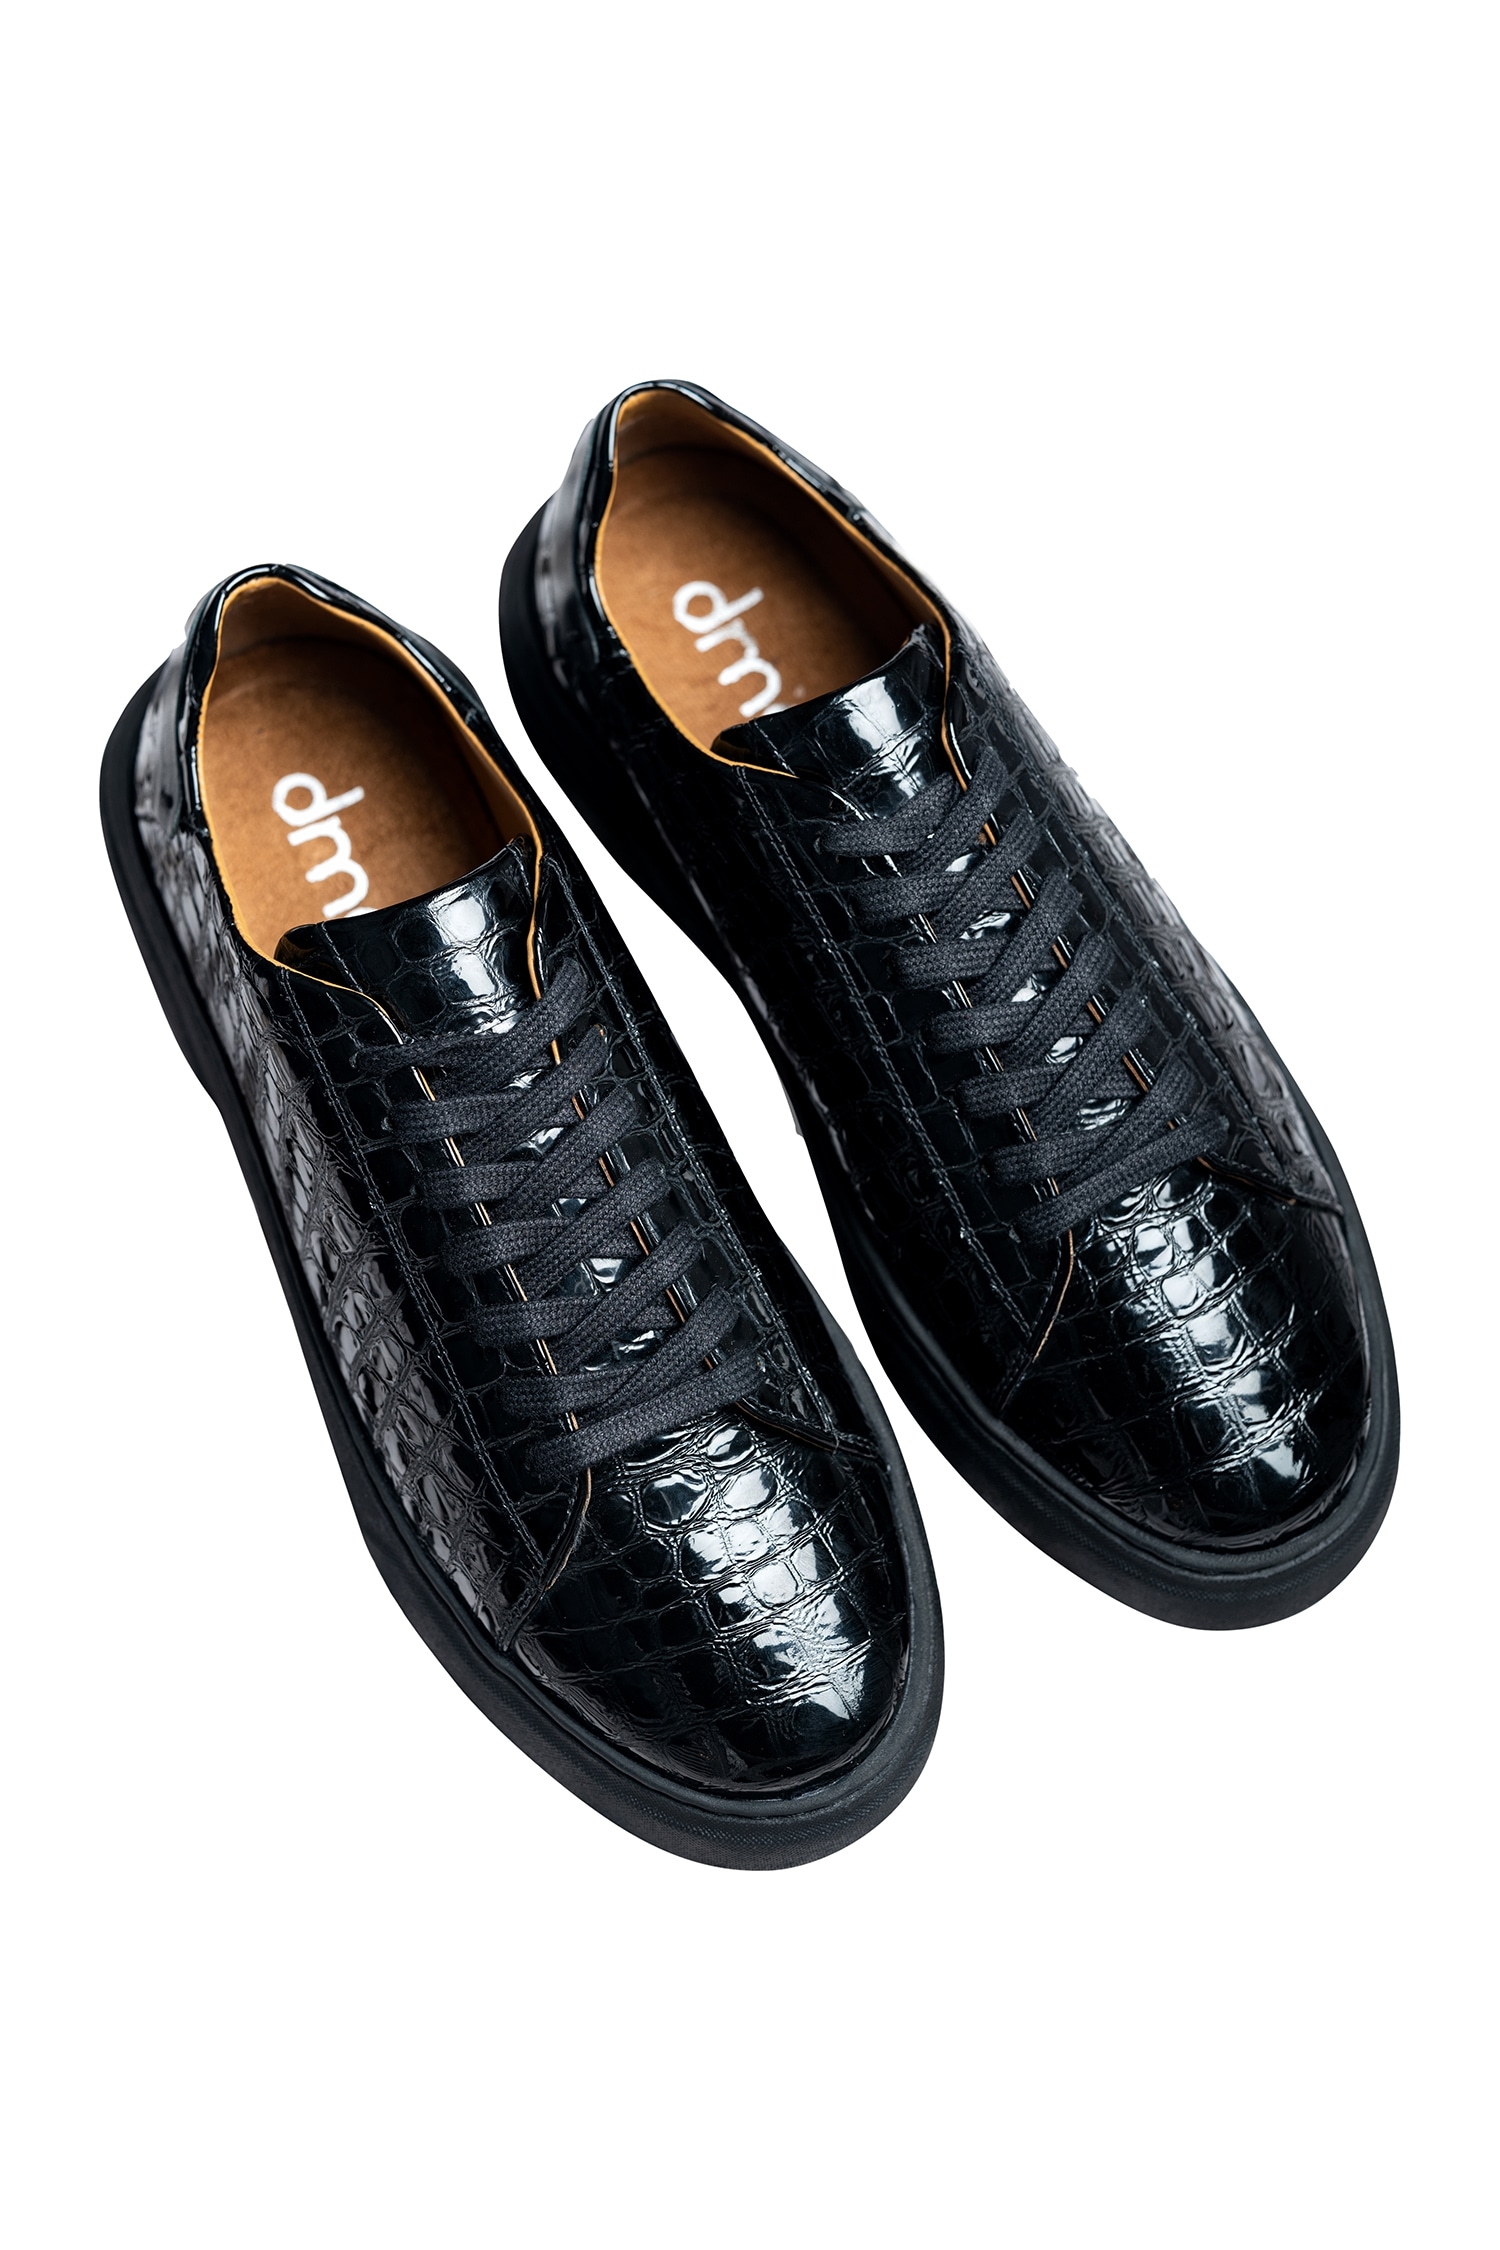 Dmodot Black Upper Material Croco Leather Sneakers